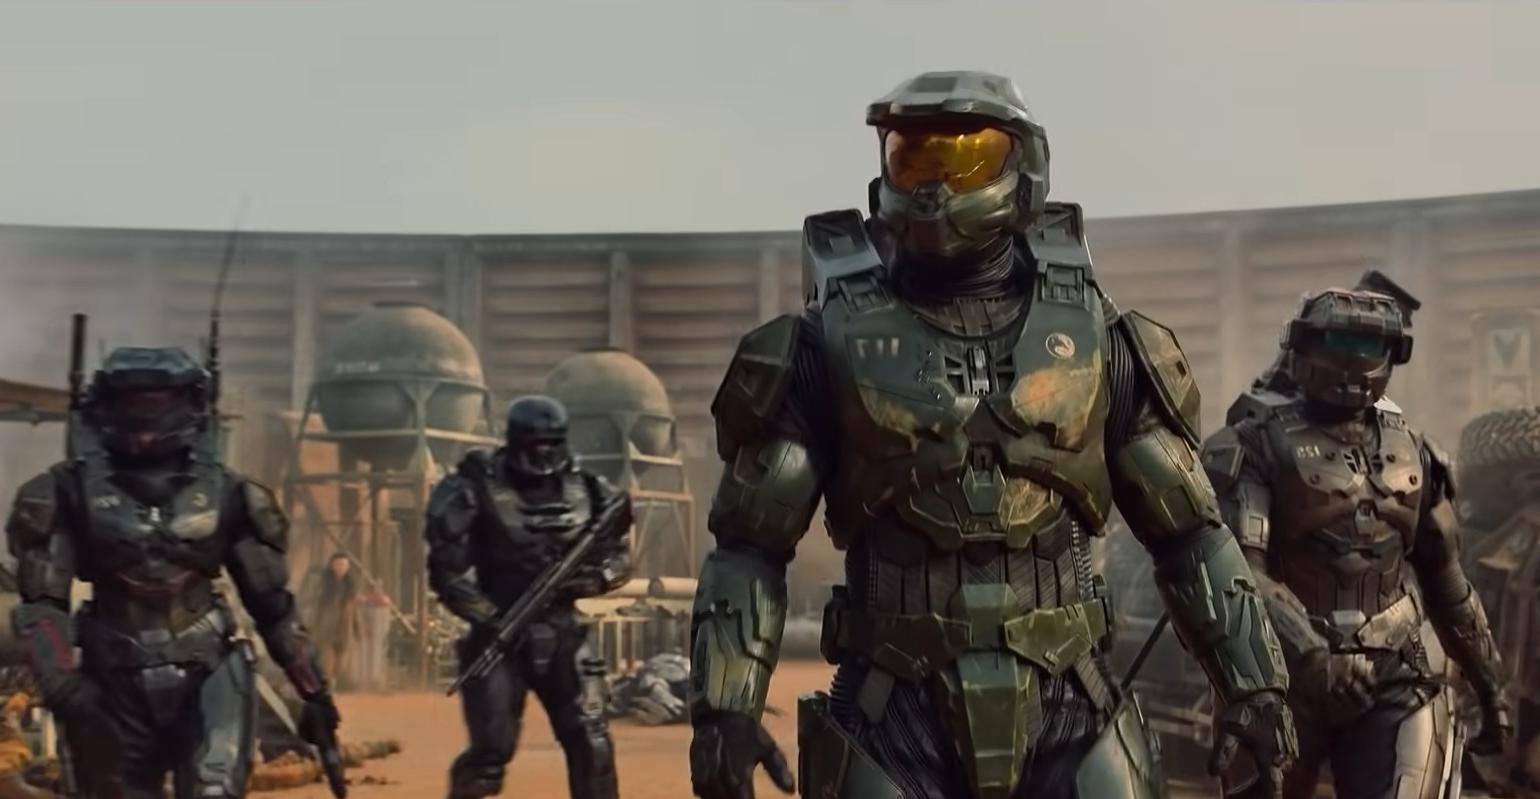 Halo TV series early review: 2 premiere episodes are an intriguing mess -  Polygon